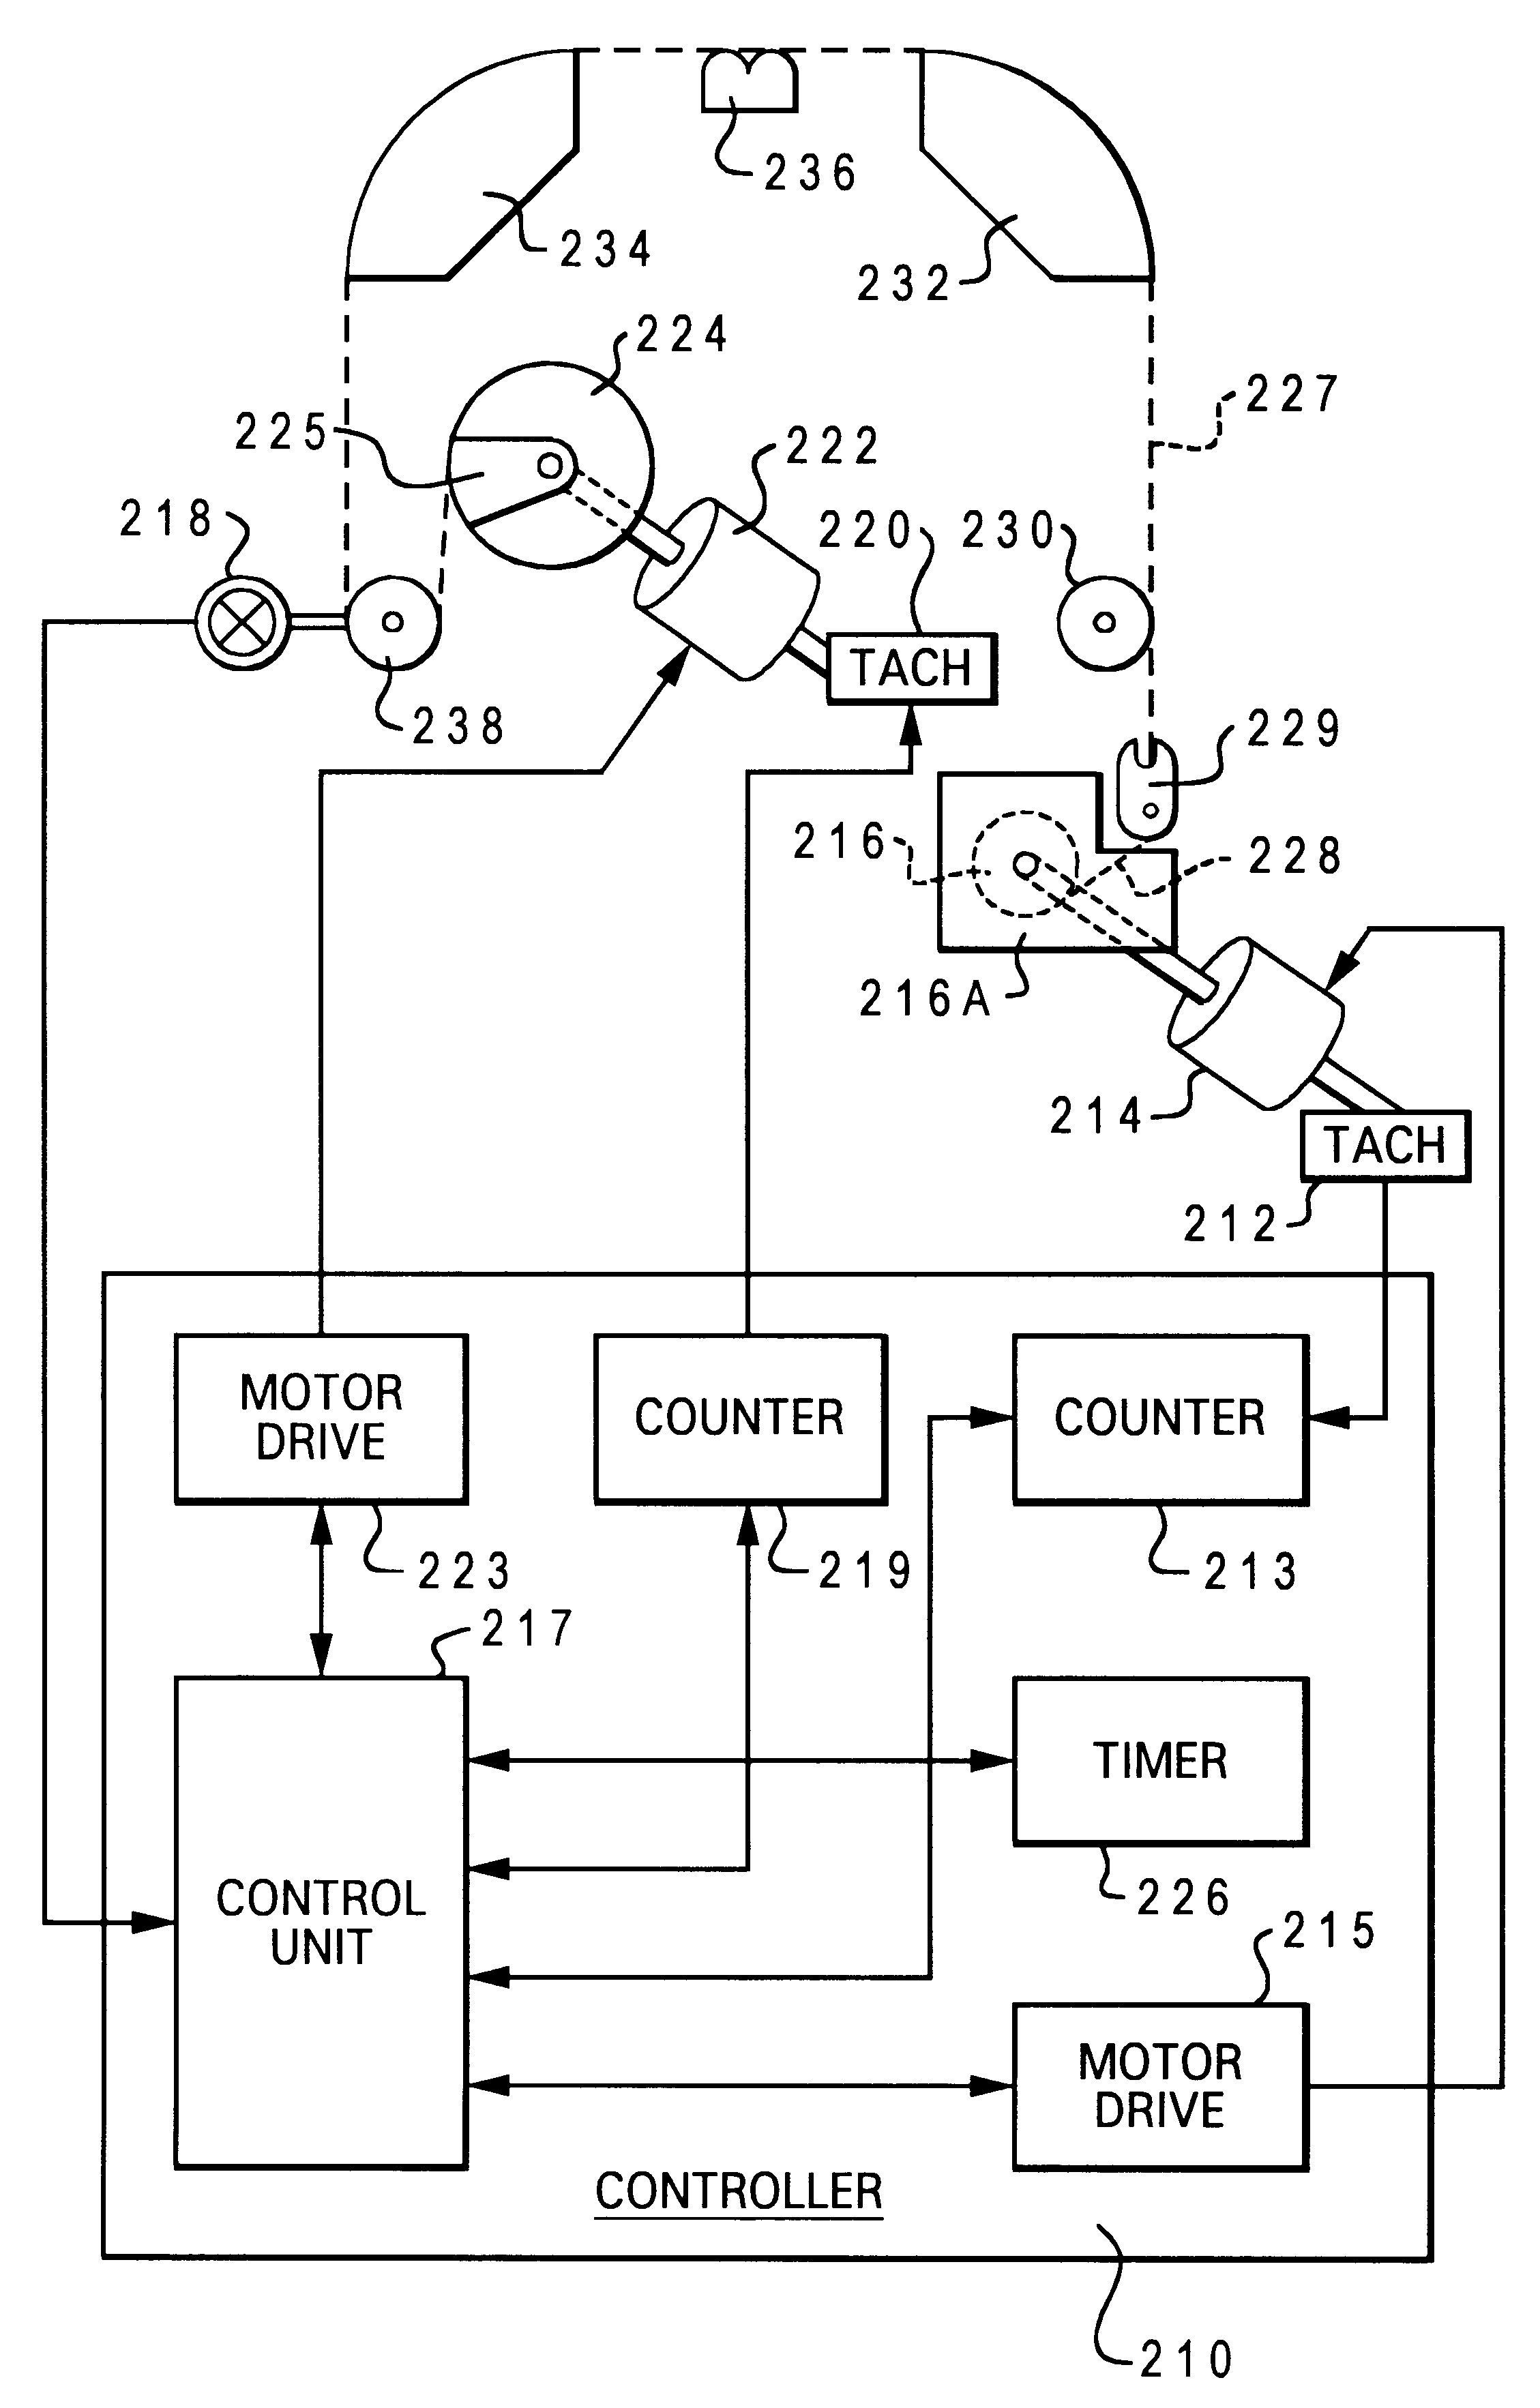 Method and system for detecting the end of a tape within a magnetic tape drive